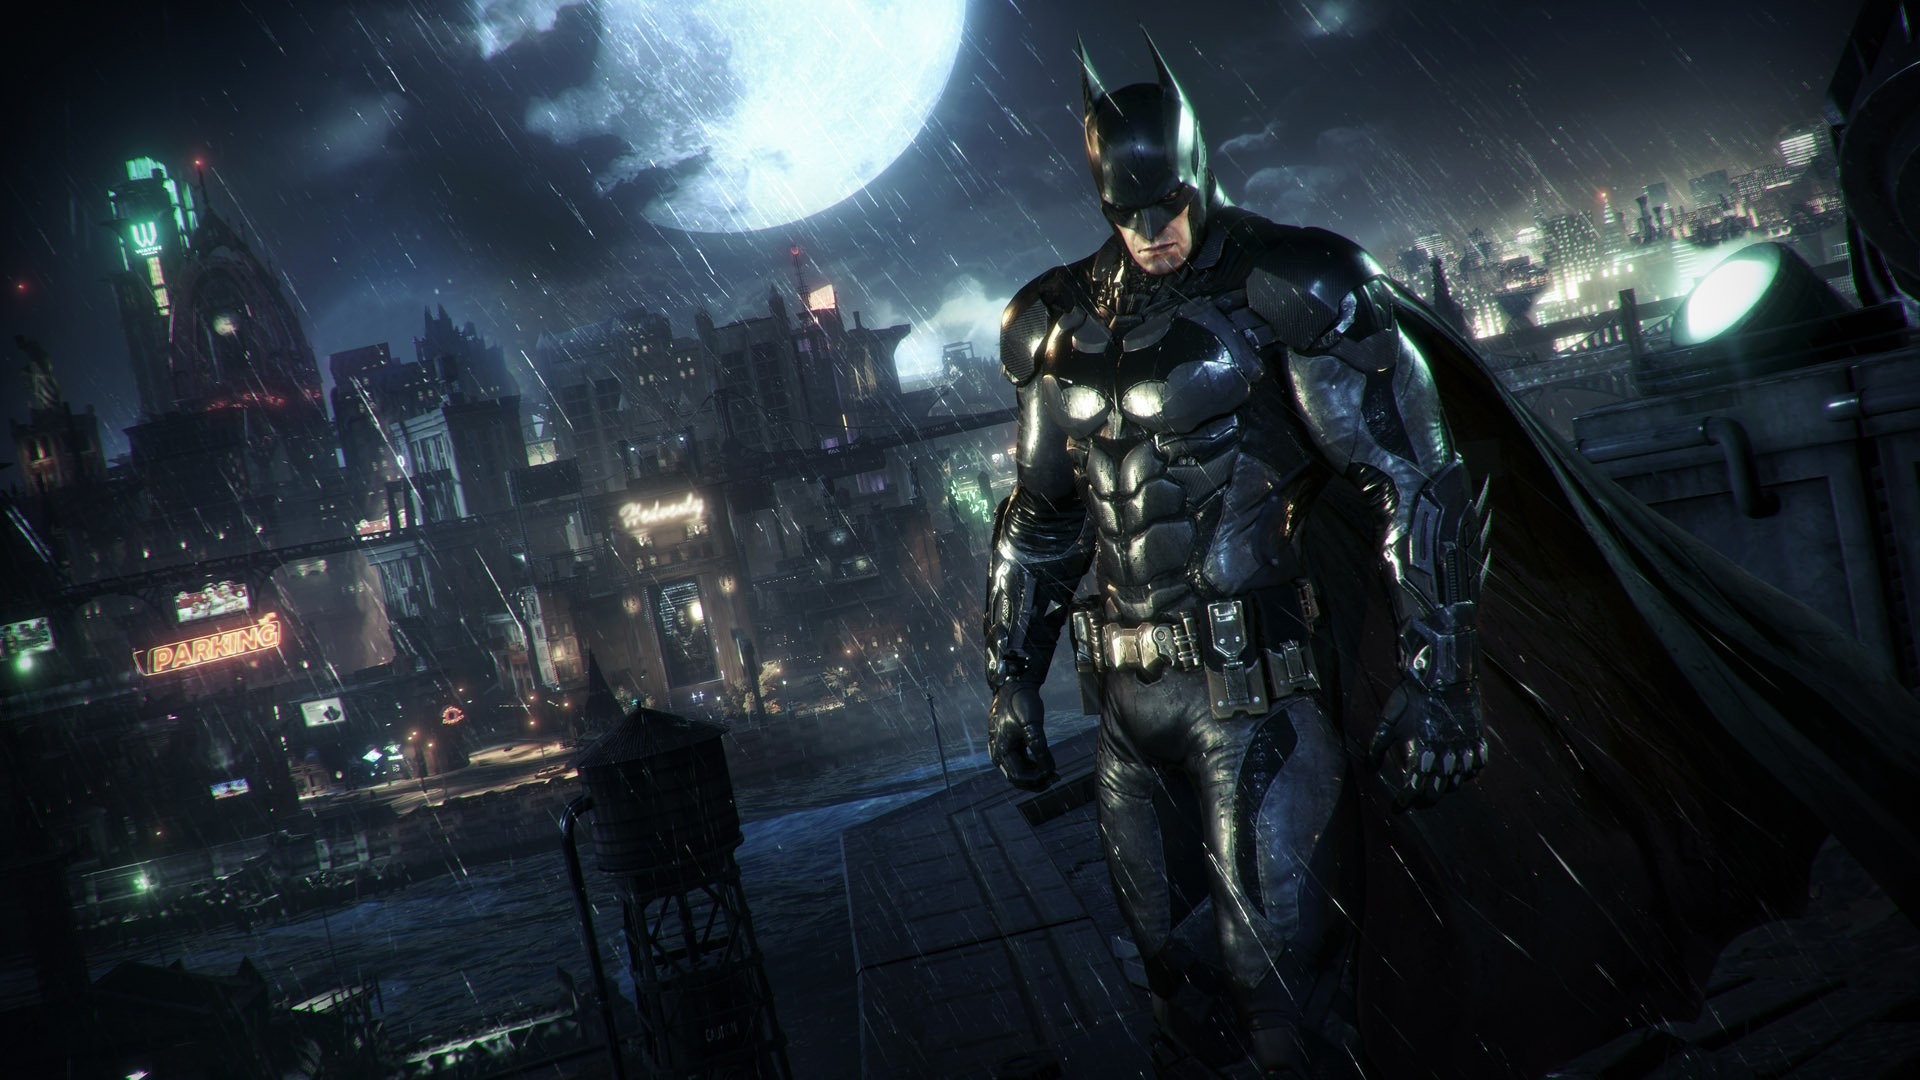 1920x1080 Search Results for “batman arkham knight wallpaper hd” – Adorable Wallpapers